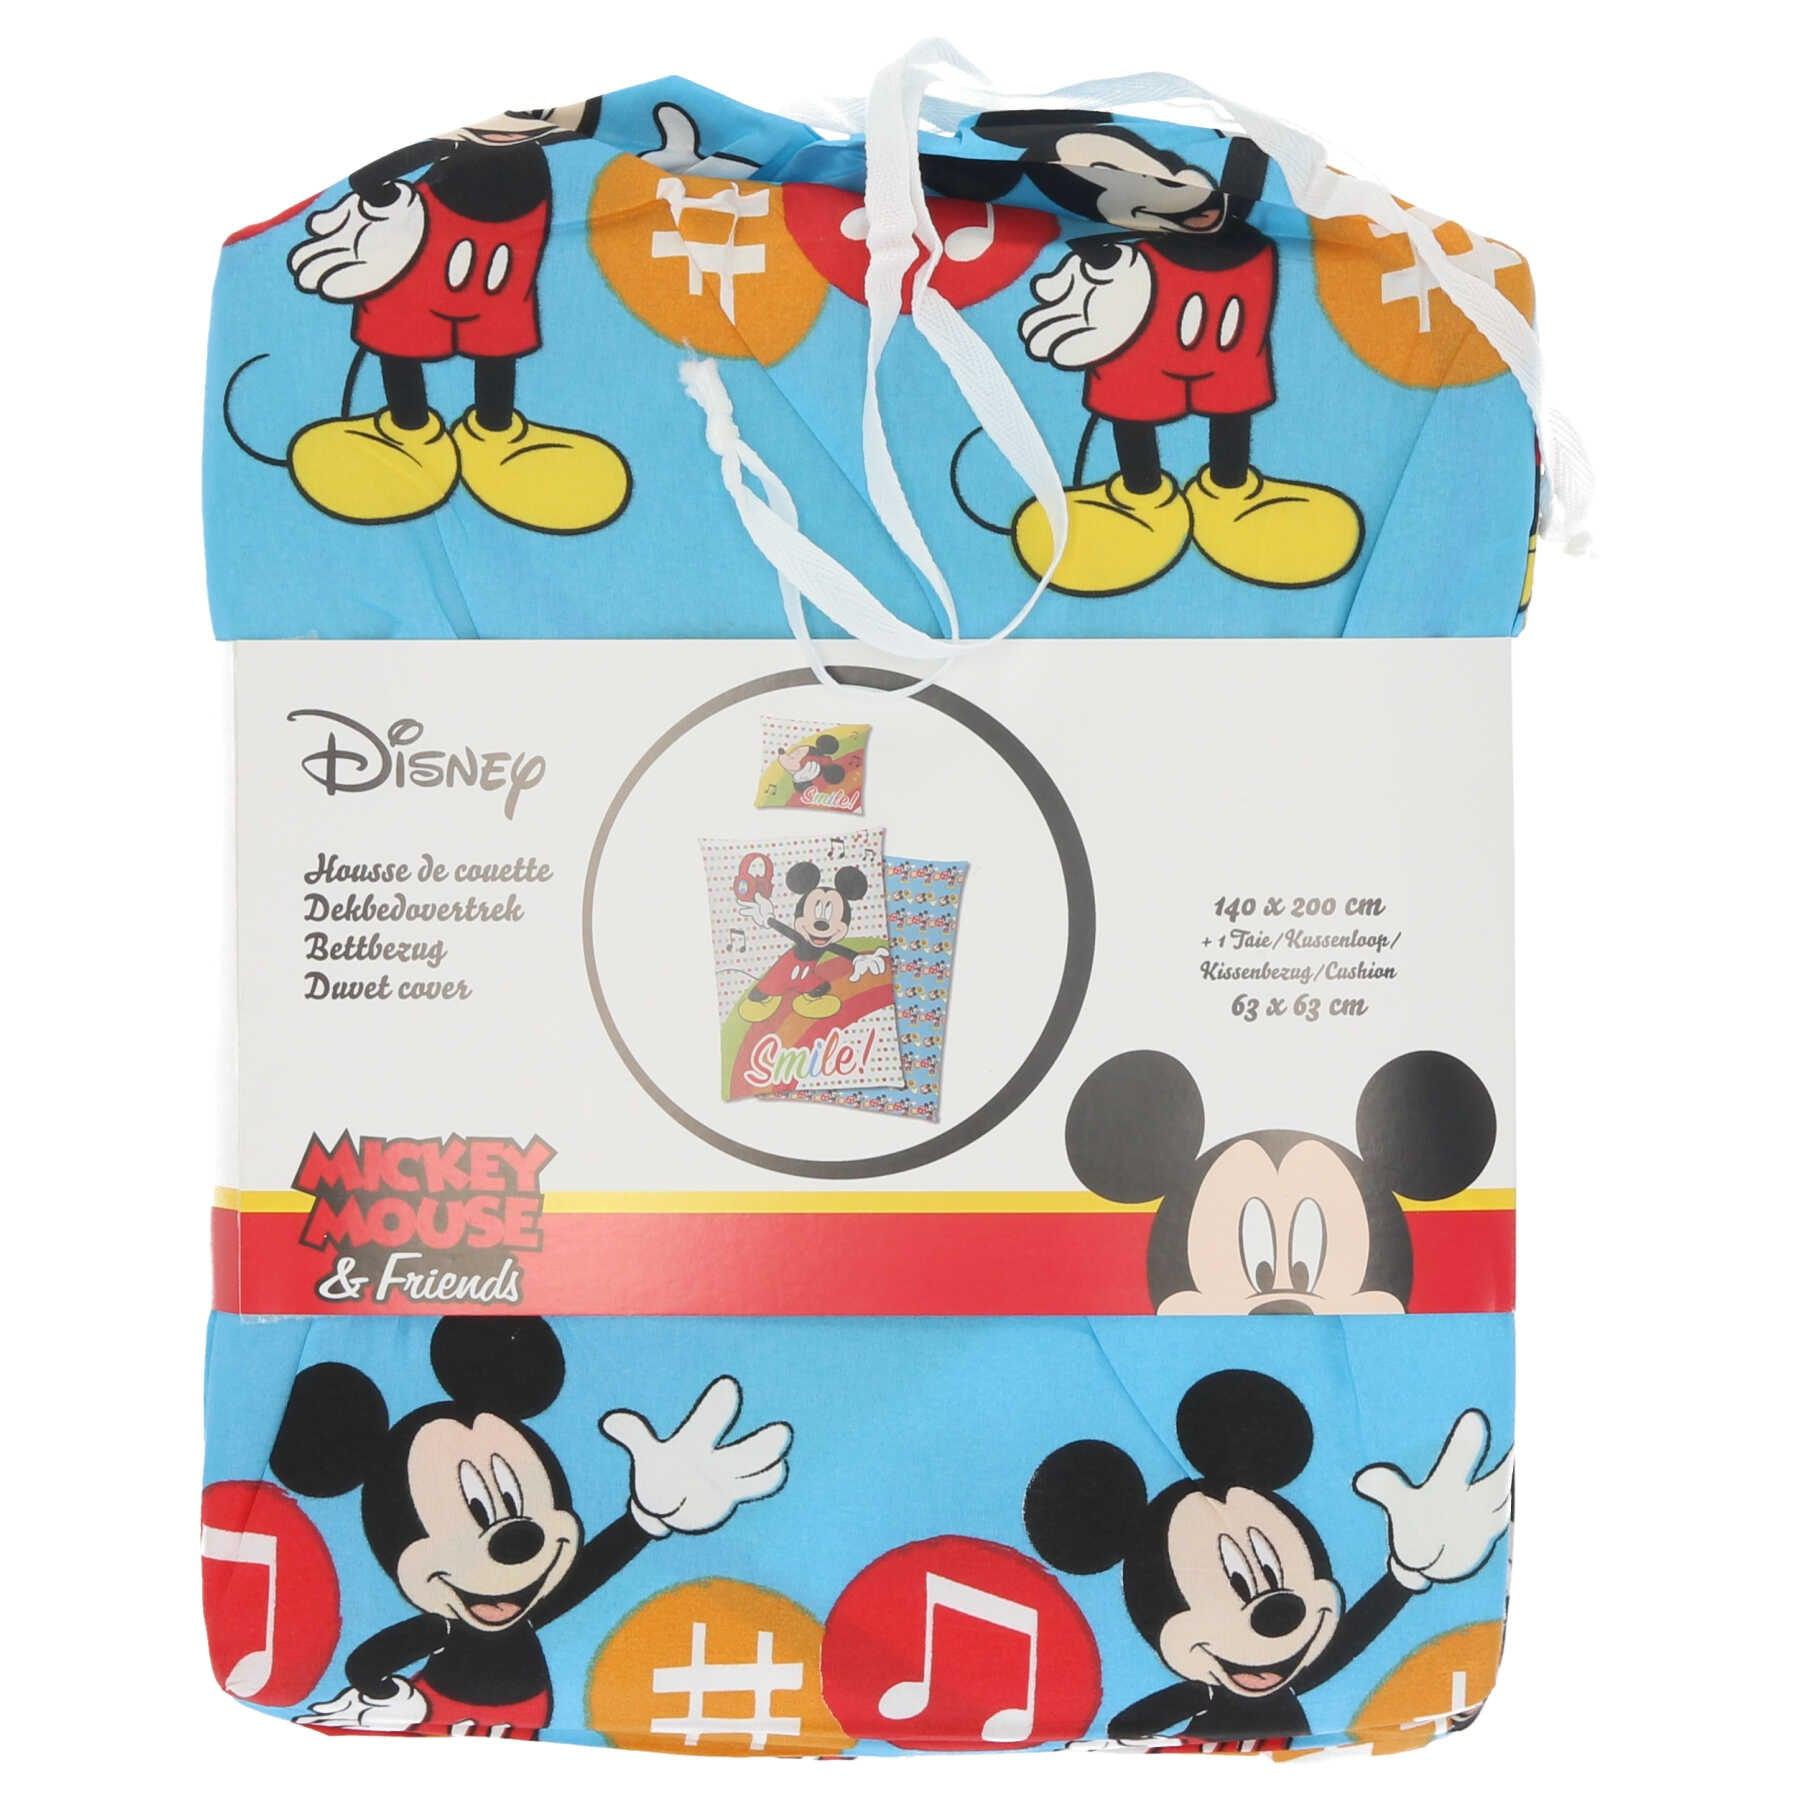 Textiel Trade - Textiel children's bedding quilt cover & pillow case mickey mouse - Mari Kali Stores Cyprus